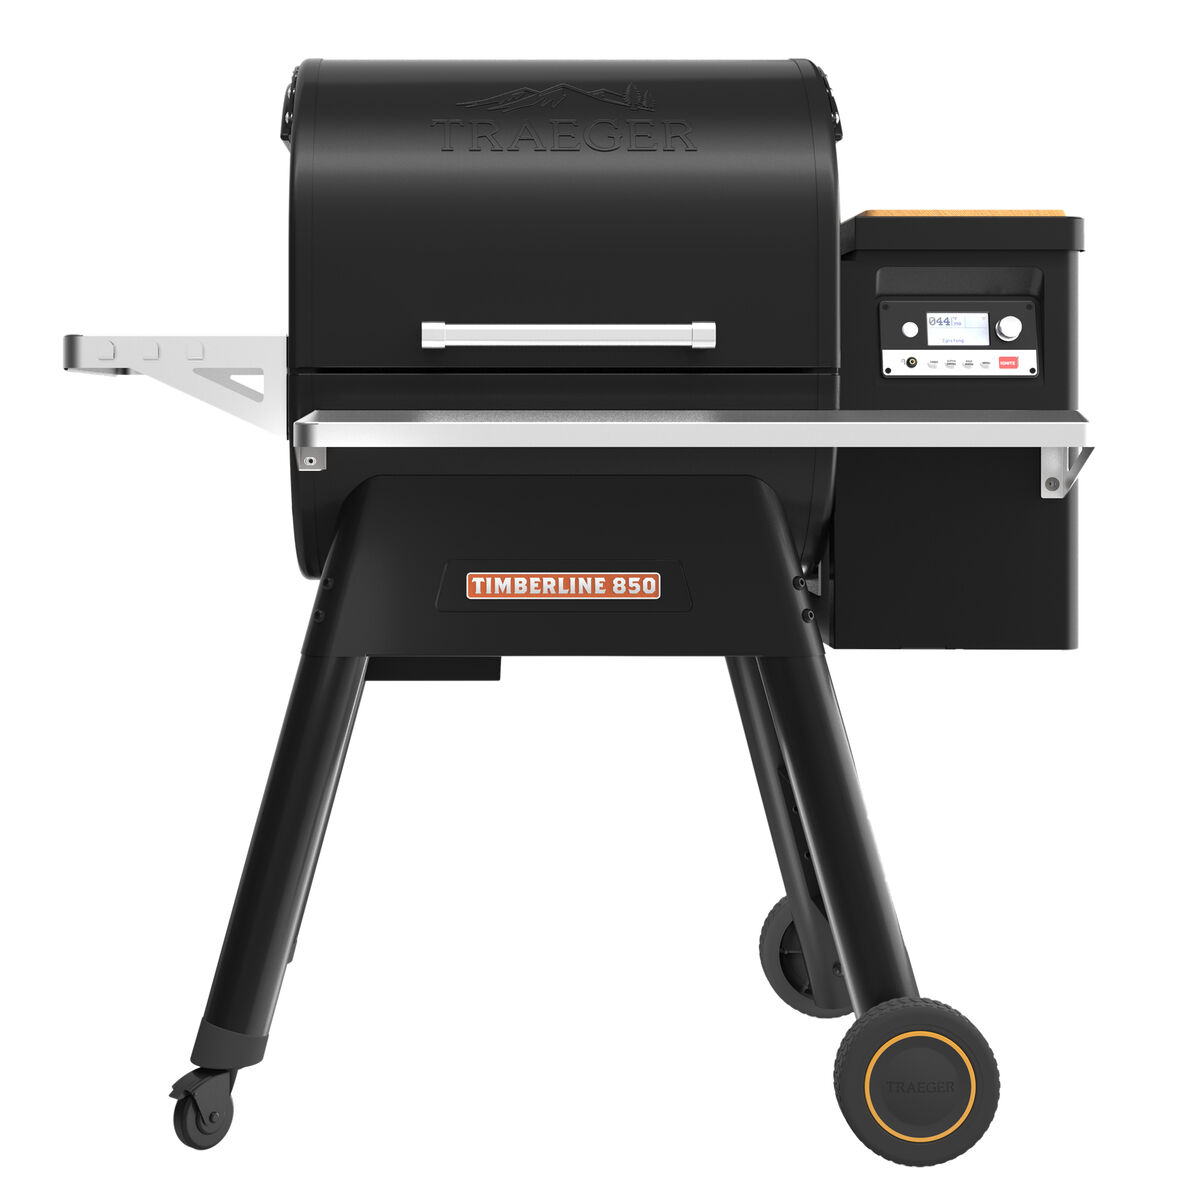 Traeger TIMBERLINE 850 Frontal